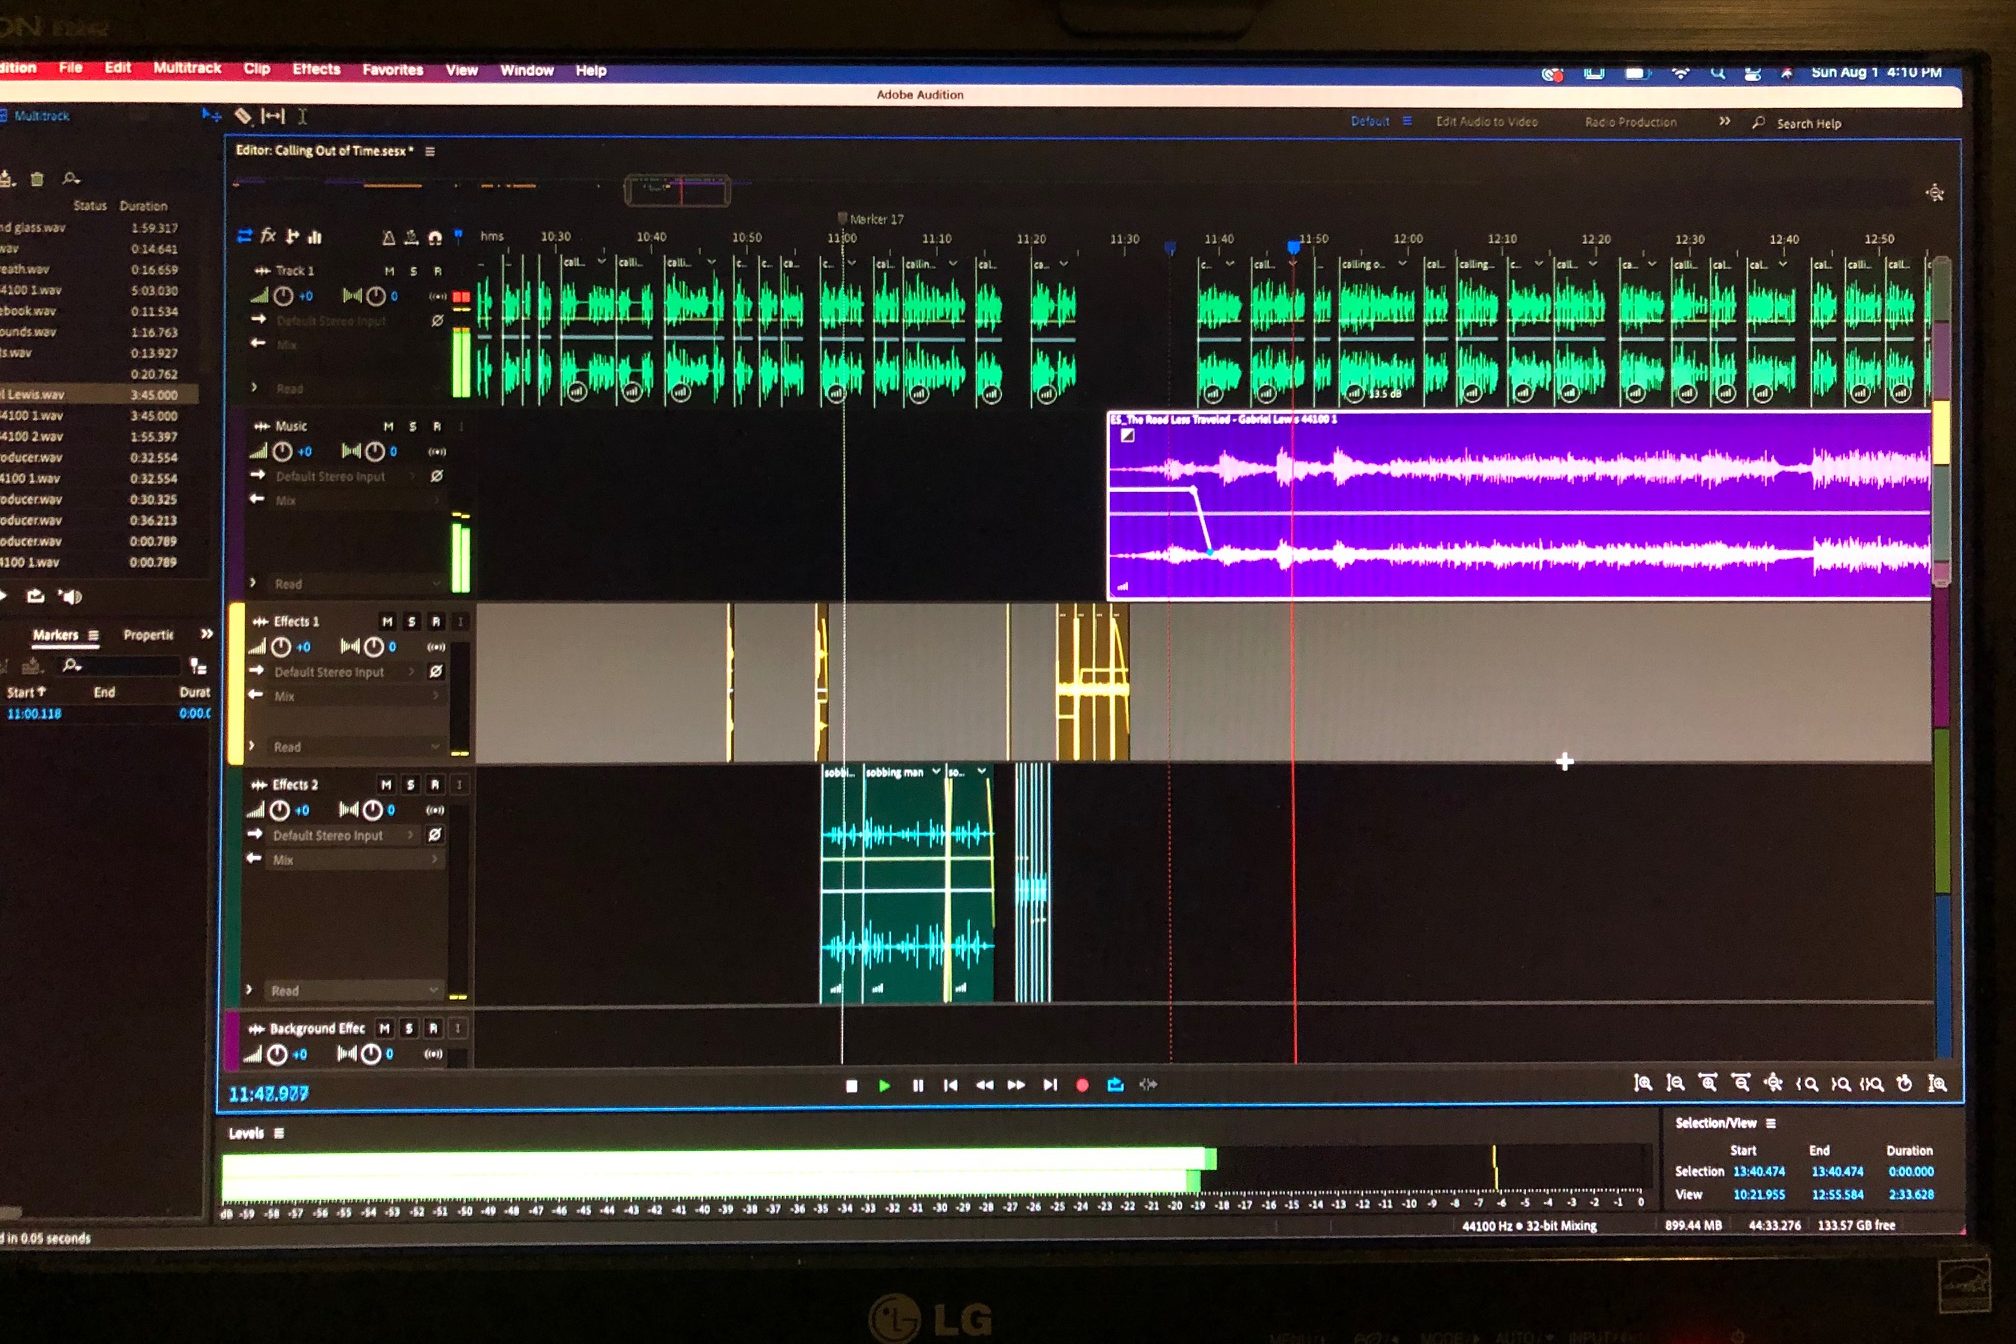 Multitrack view in Adobe Audition. Four tracks displayed.

Top (green waveforms) = Narration
2nd (violet waveform) = Music
3rd (yellow waveforms) = Sound effects
4th (Aqua waveforms) = Additional sound effects